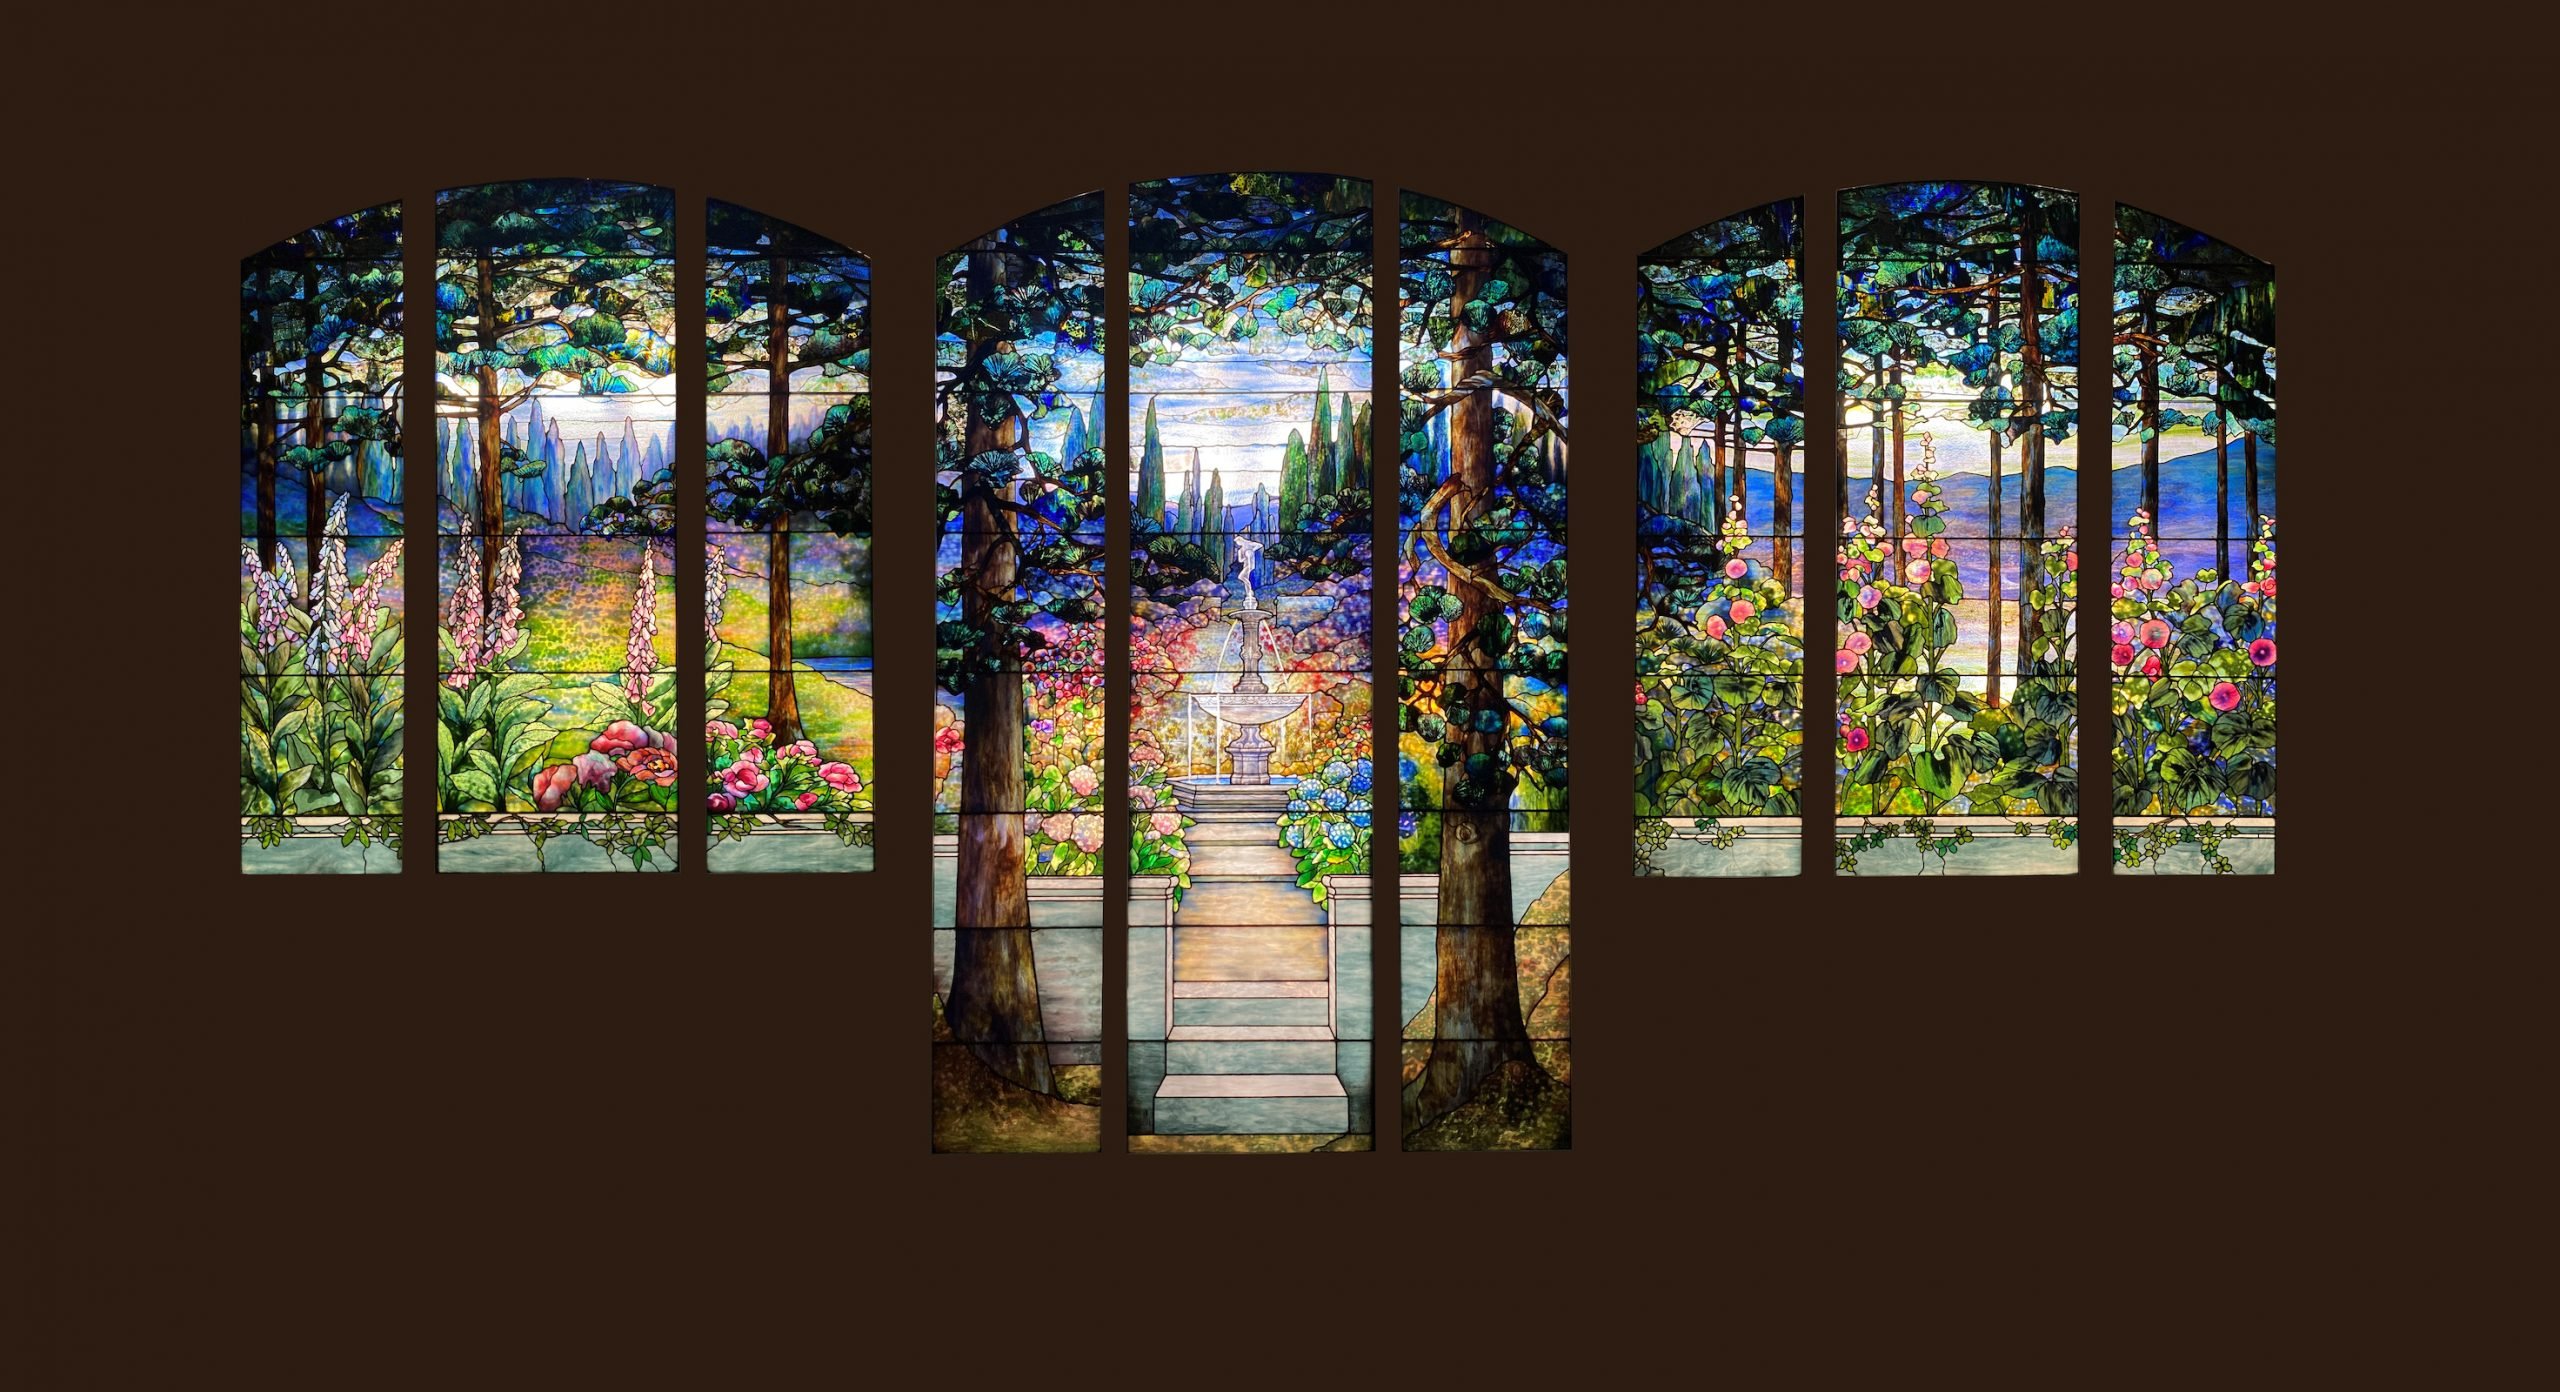 7 of the World's Most Beautiful Stained-Glass Windows - Galerie